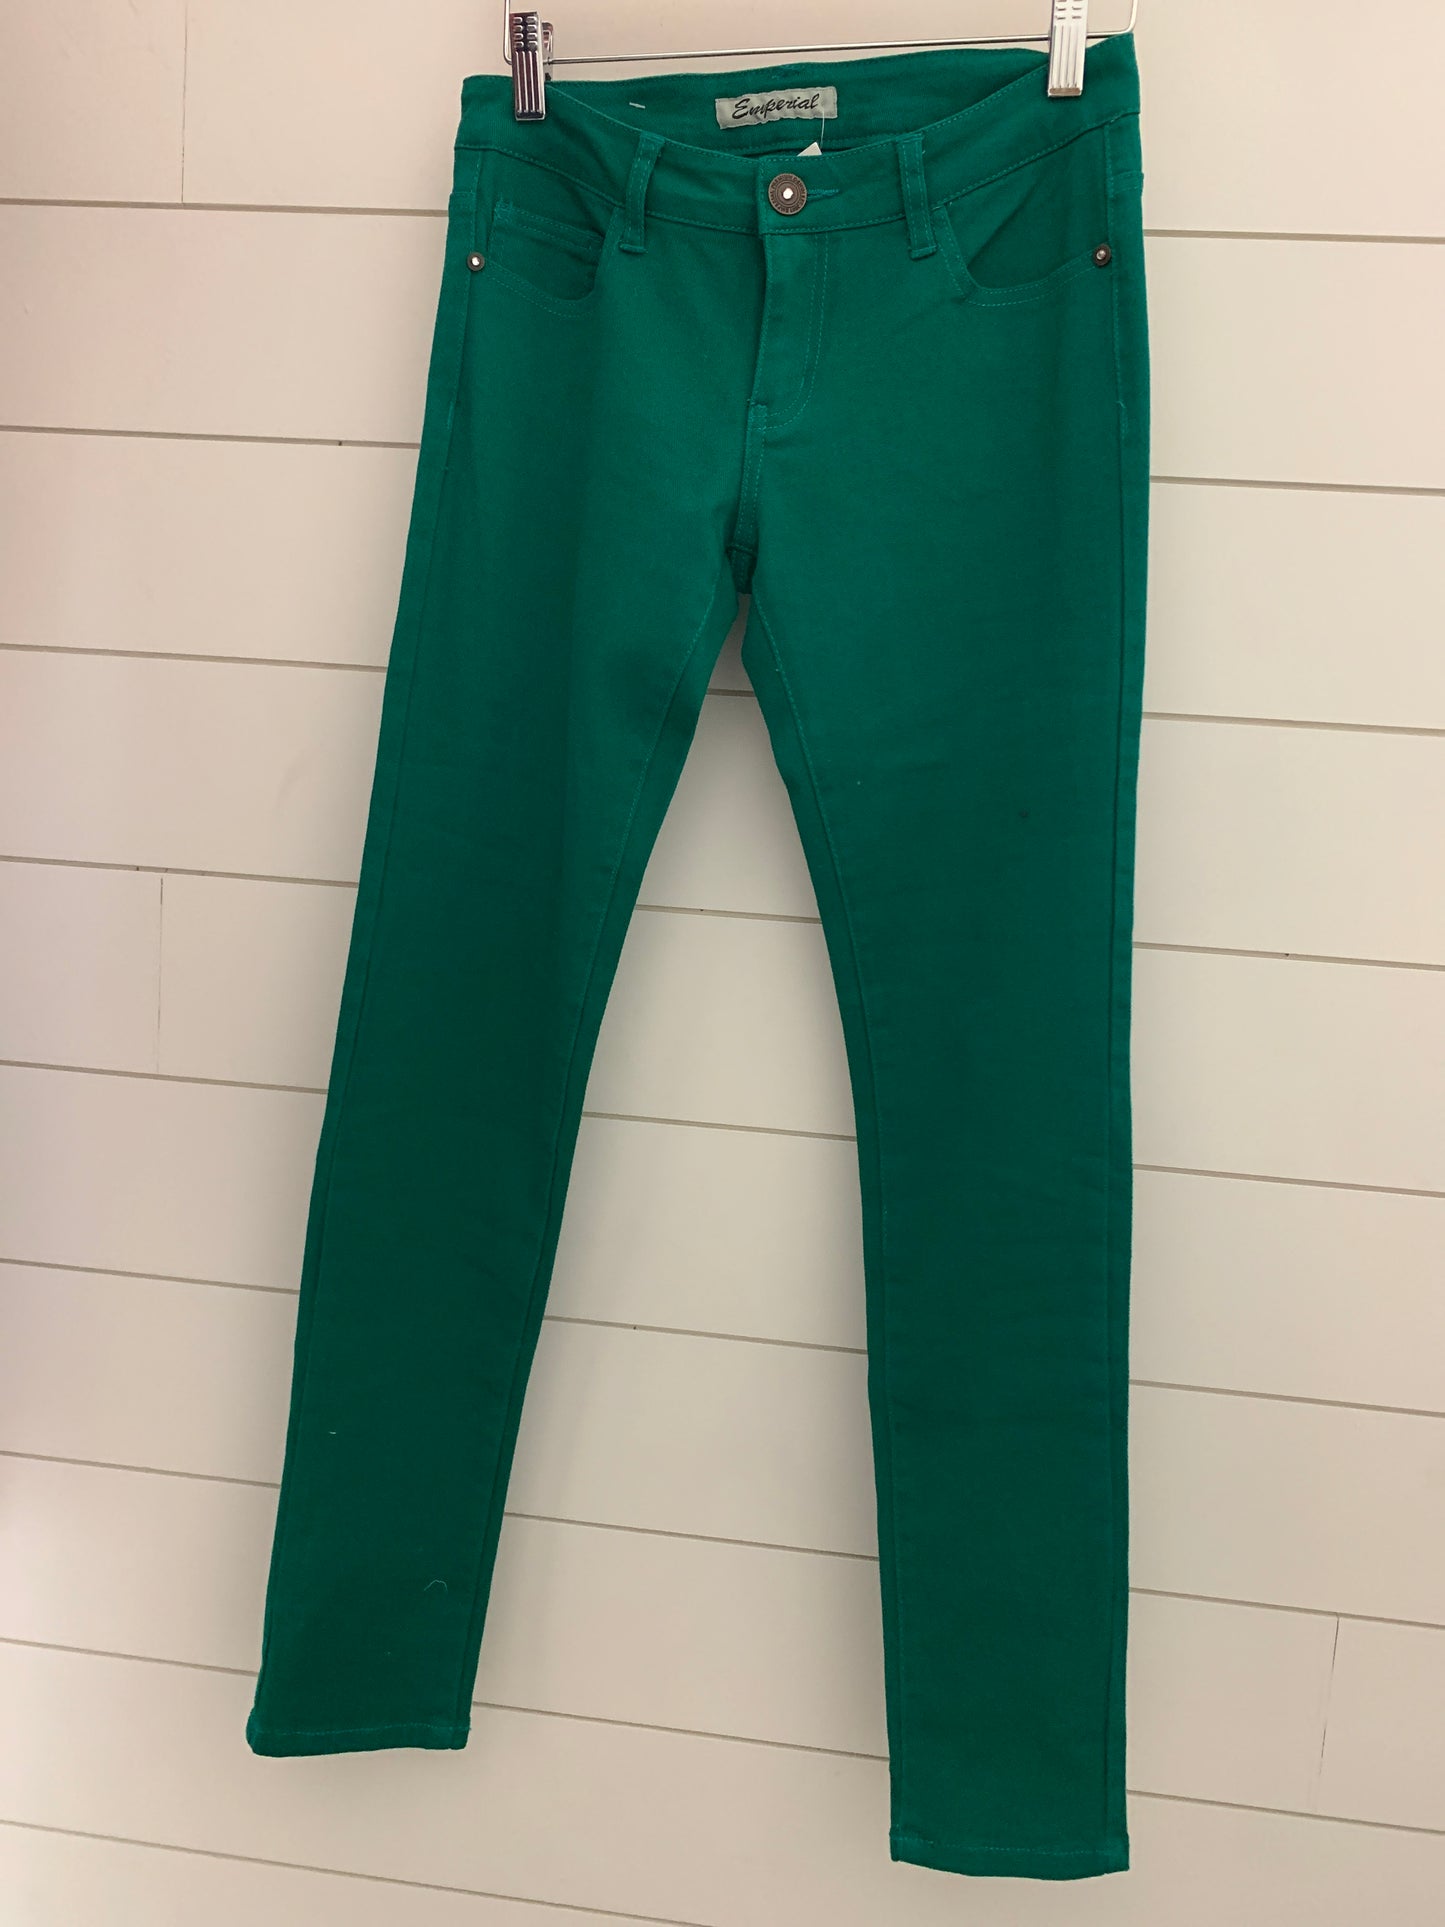 Kelly Green Low Rise Jeans